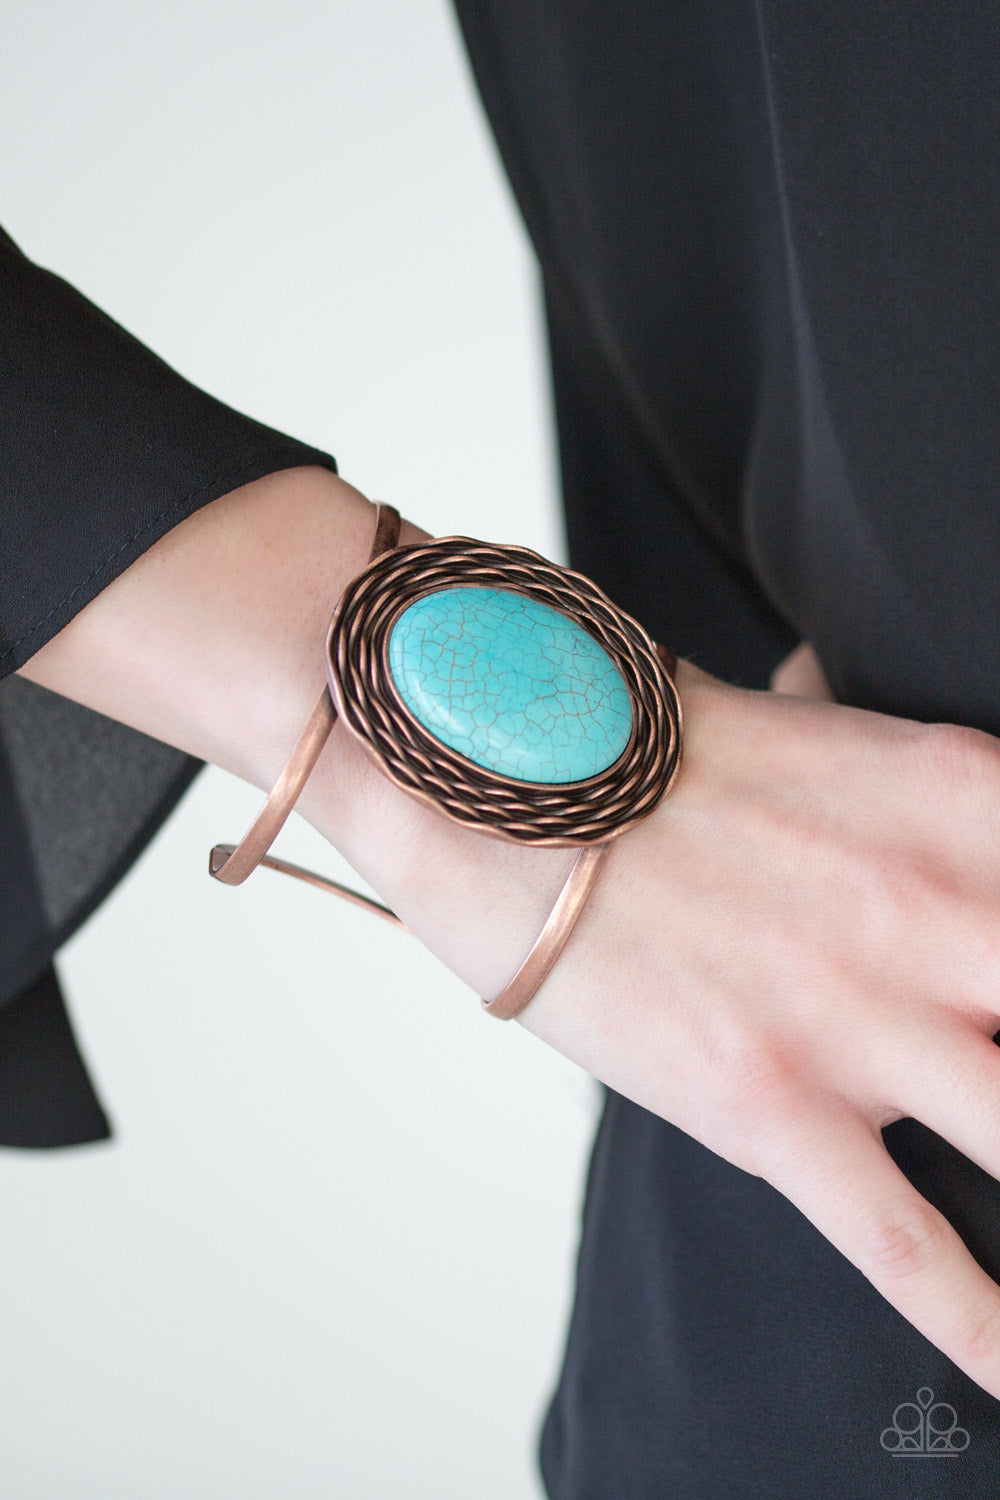 ONE FOR THE RODEO - COPPER TEXTURED BLUE TURQUOISE OVAL CUFF BRACELET